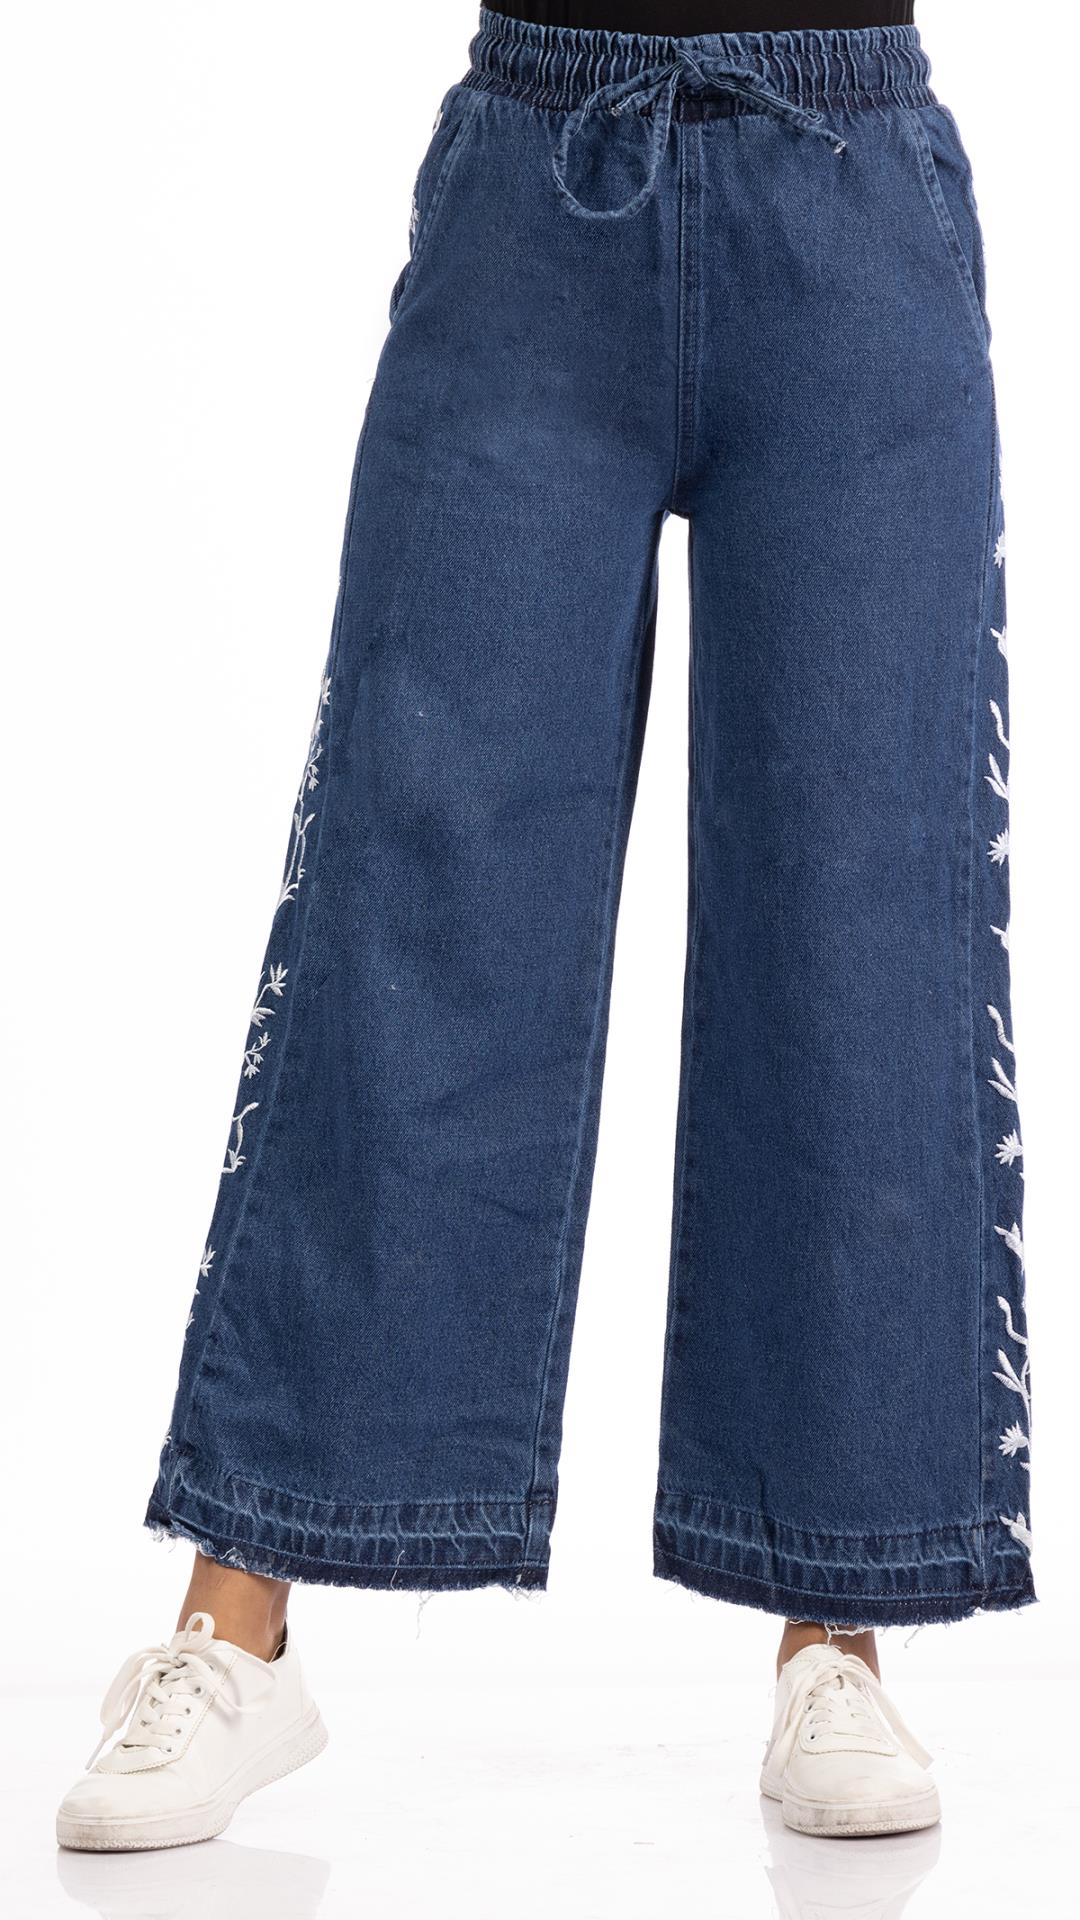 Jeans decorated with white drawings on the side 